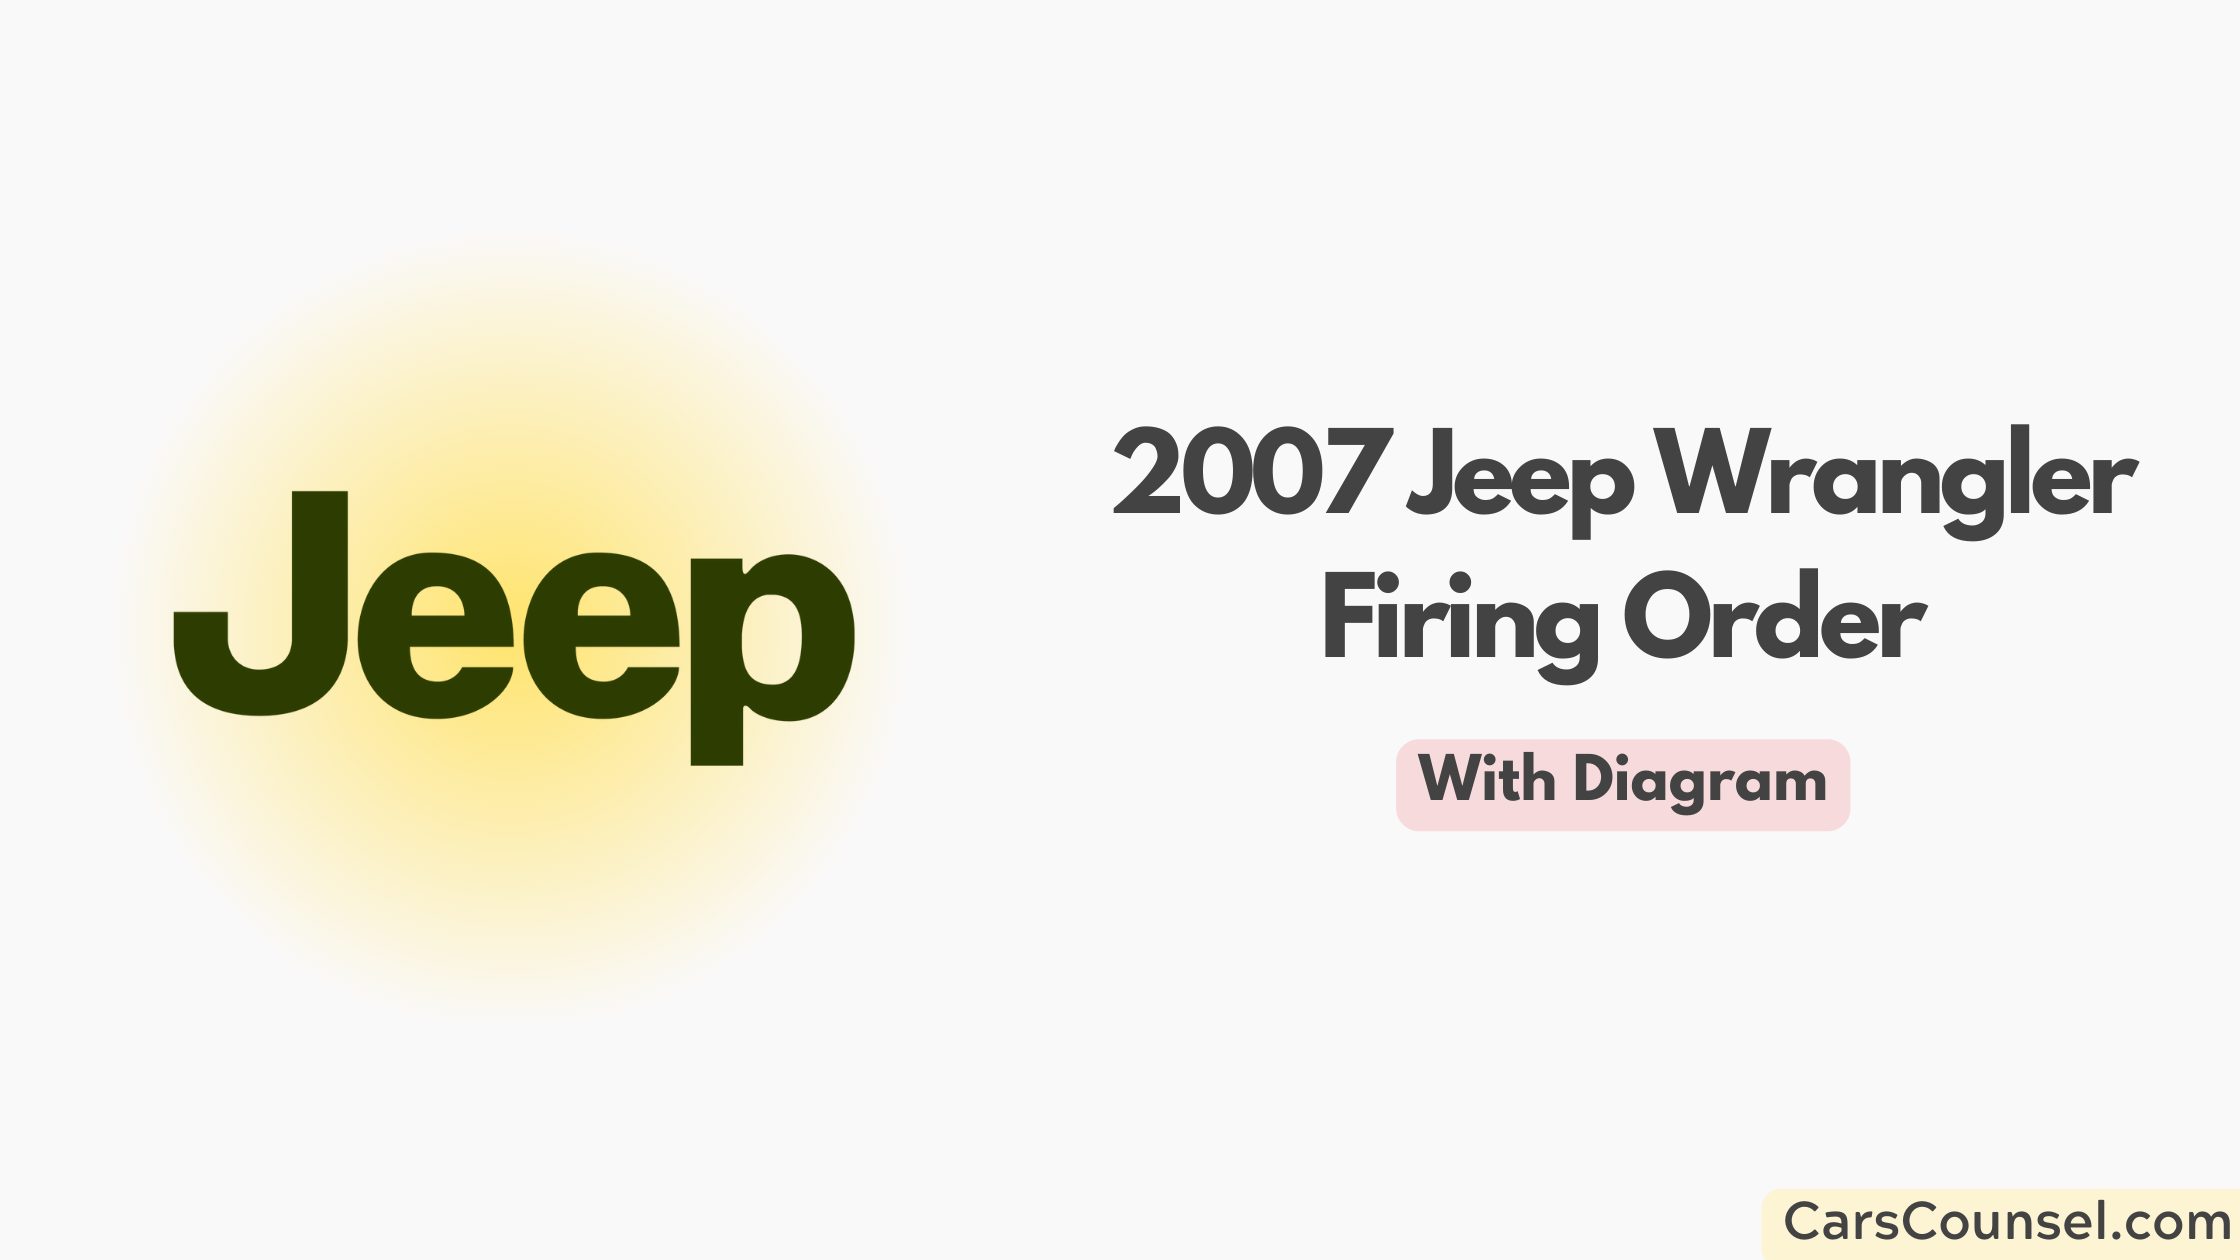 2007 Jeep Wrangler Firing Order With Diagram